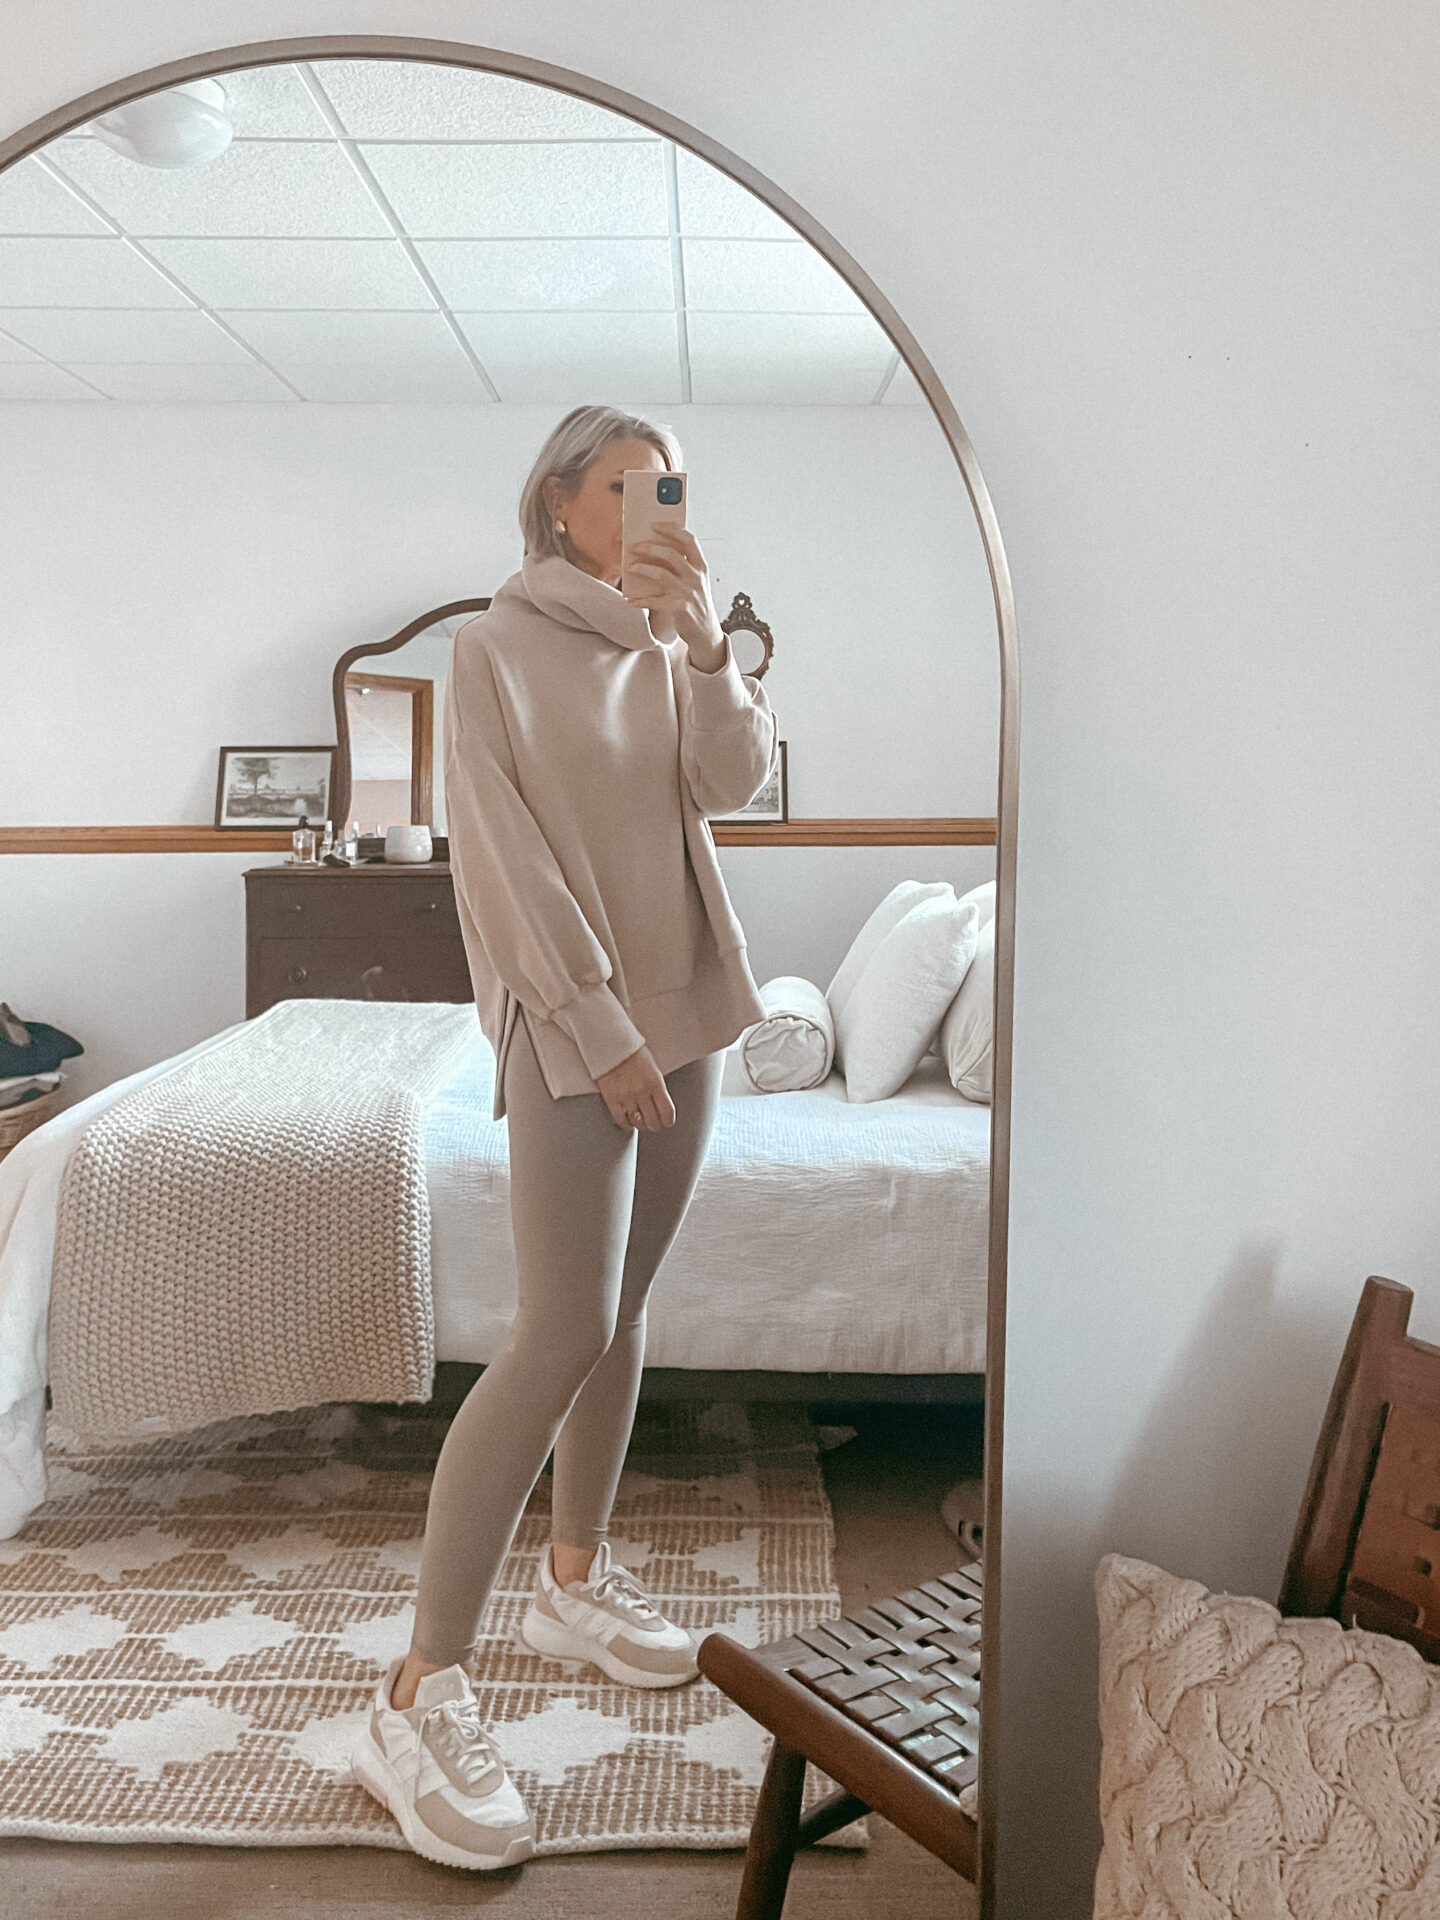 Karin Emily wears an oatmeal colored sweatshirt from Varley and oatmeal colored leggings from Alo yoga with neutral colored Adidas sneakers